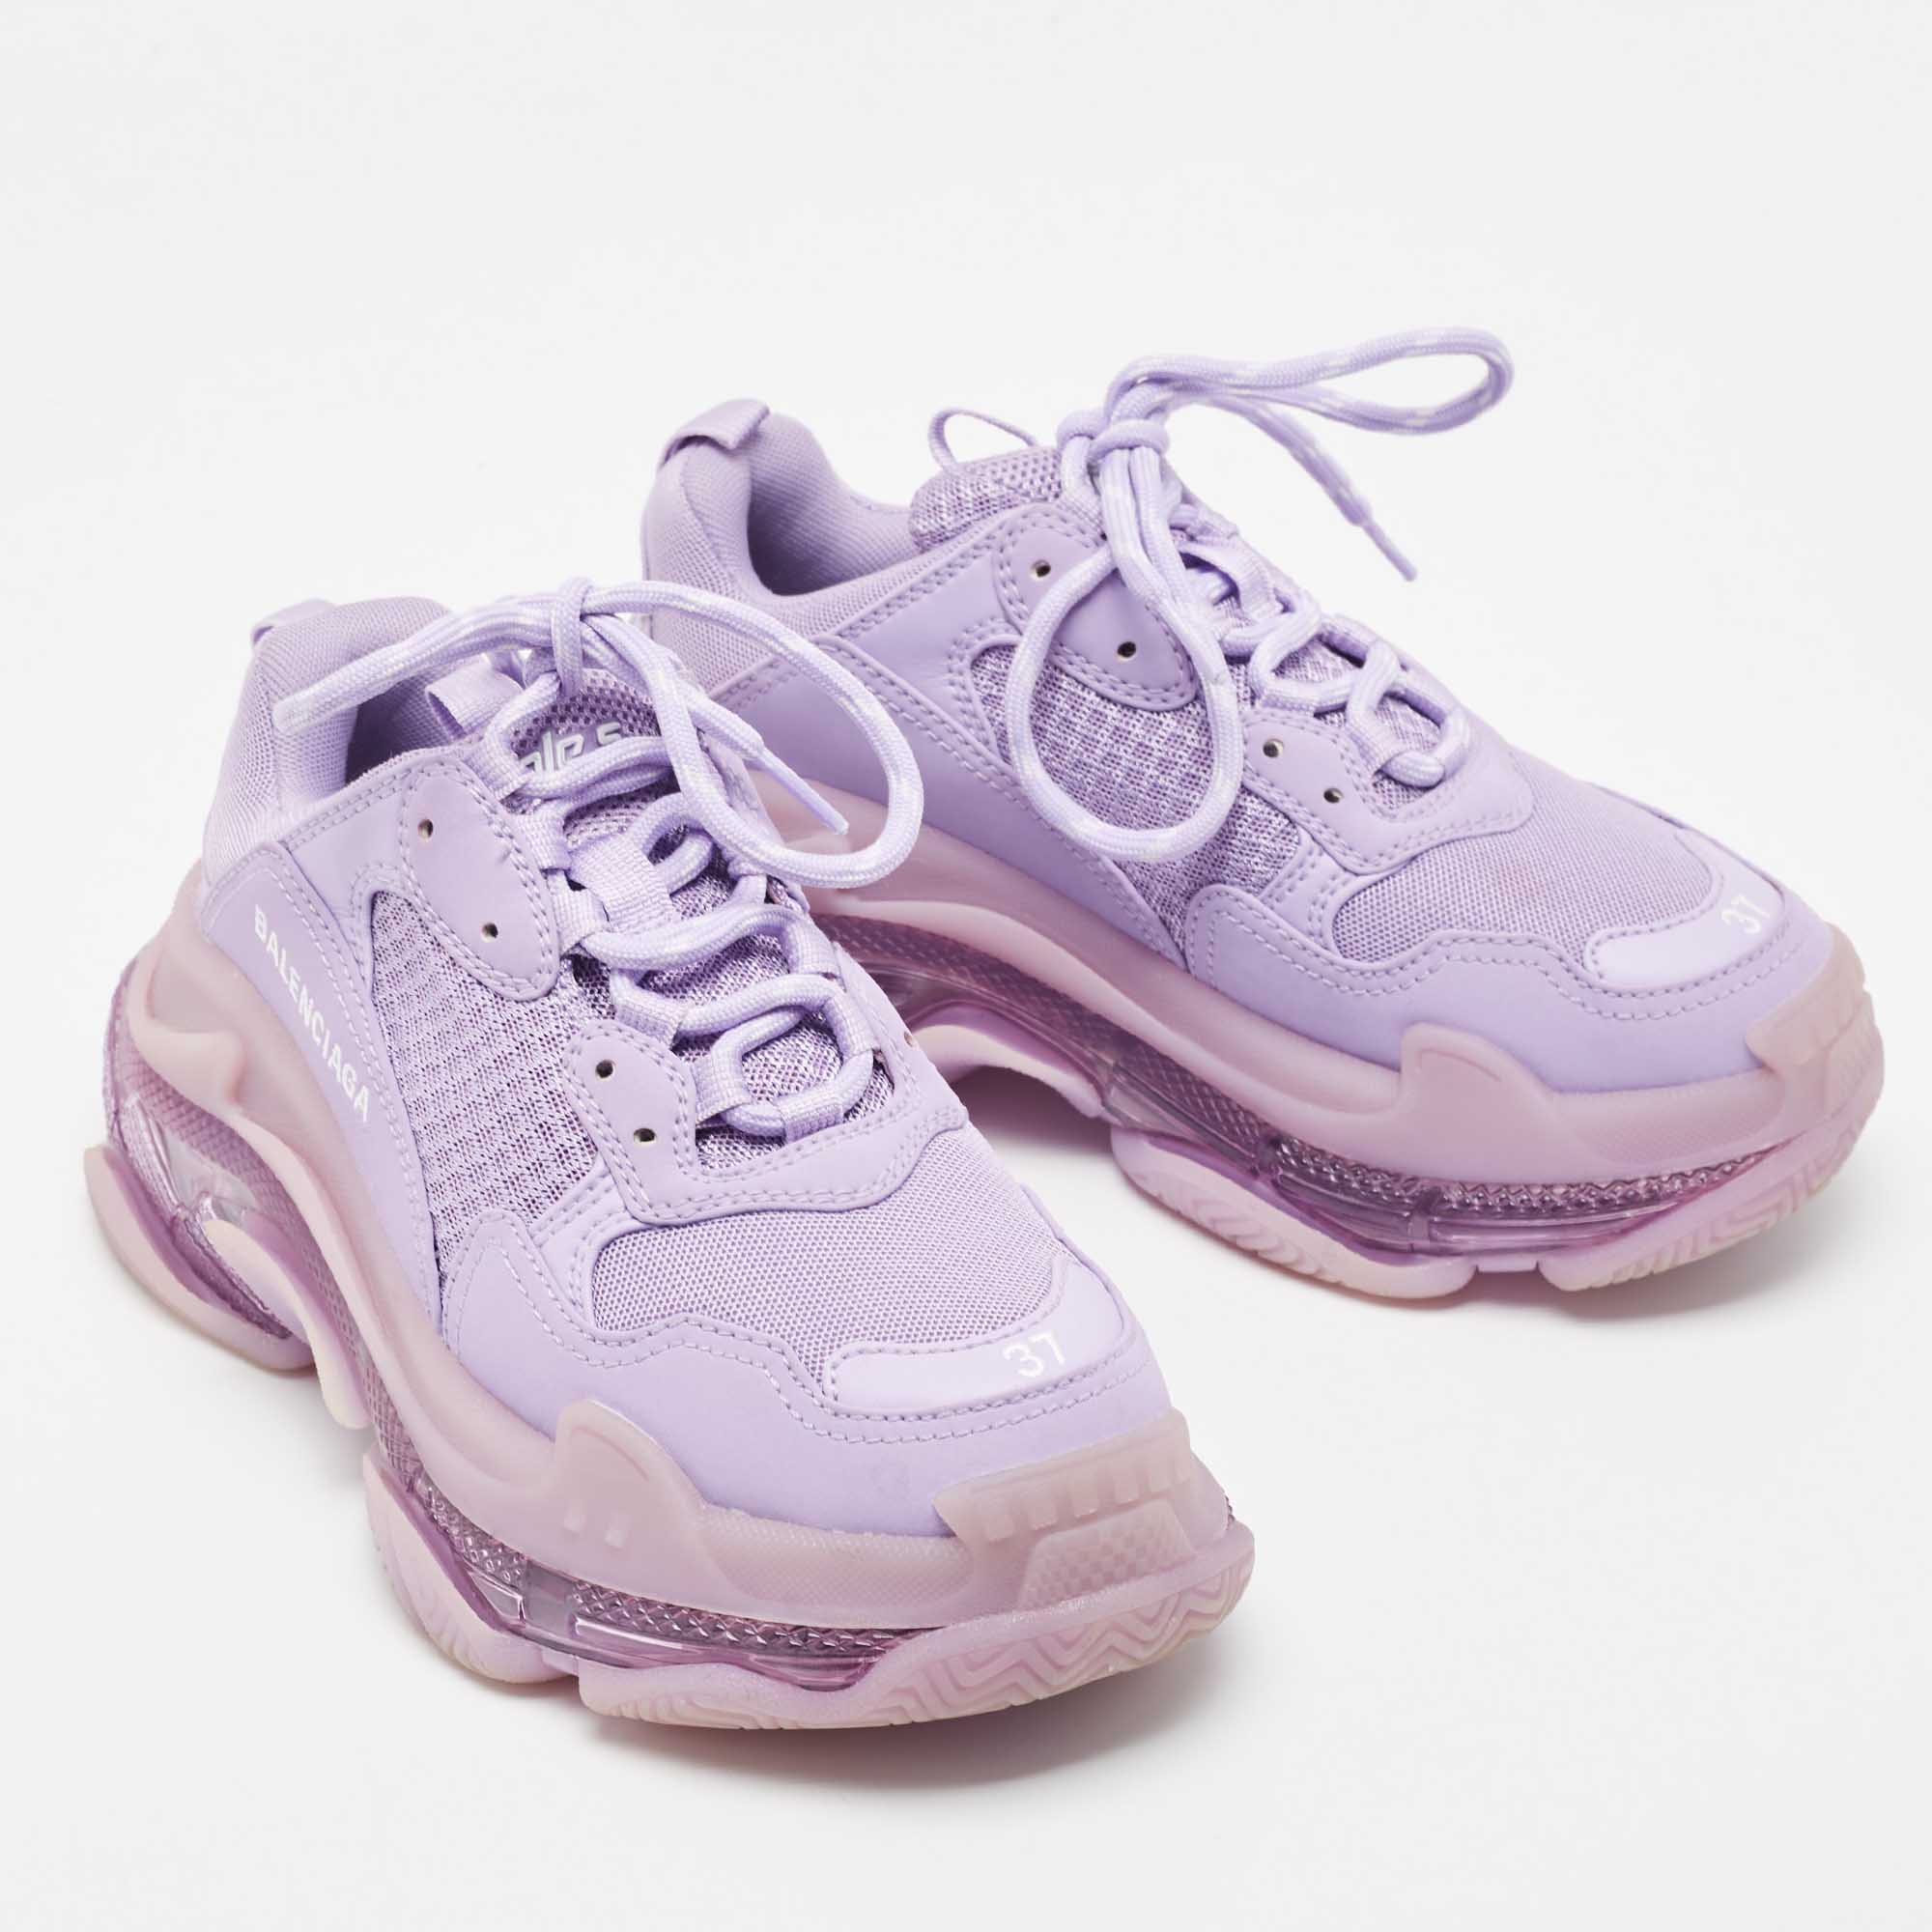 Balenciaga Purple Mesh And Leather Triple S Clear Sole Sneakers Size 37